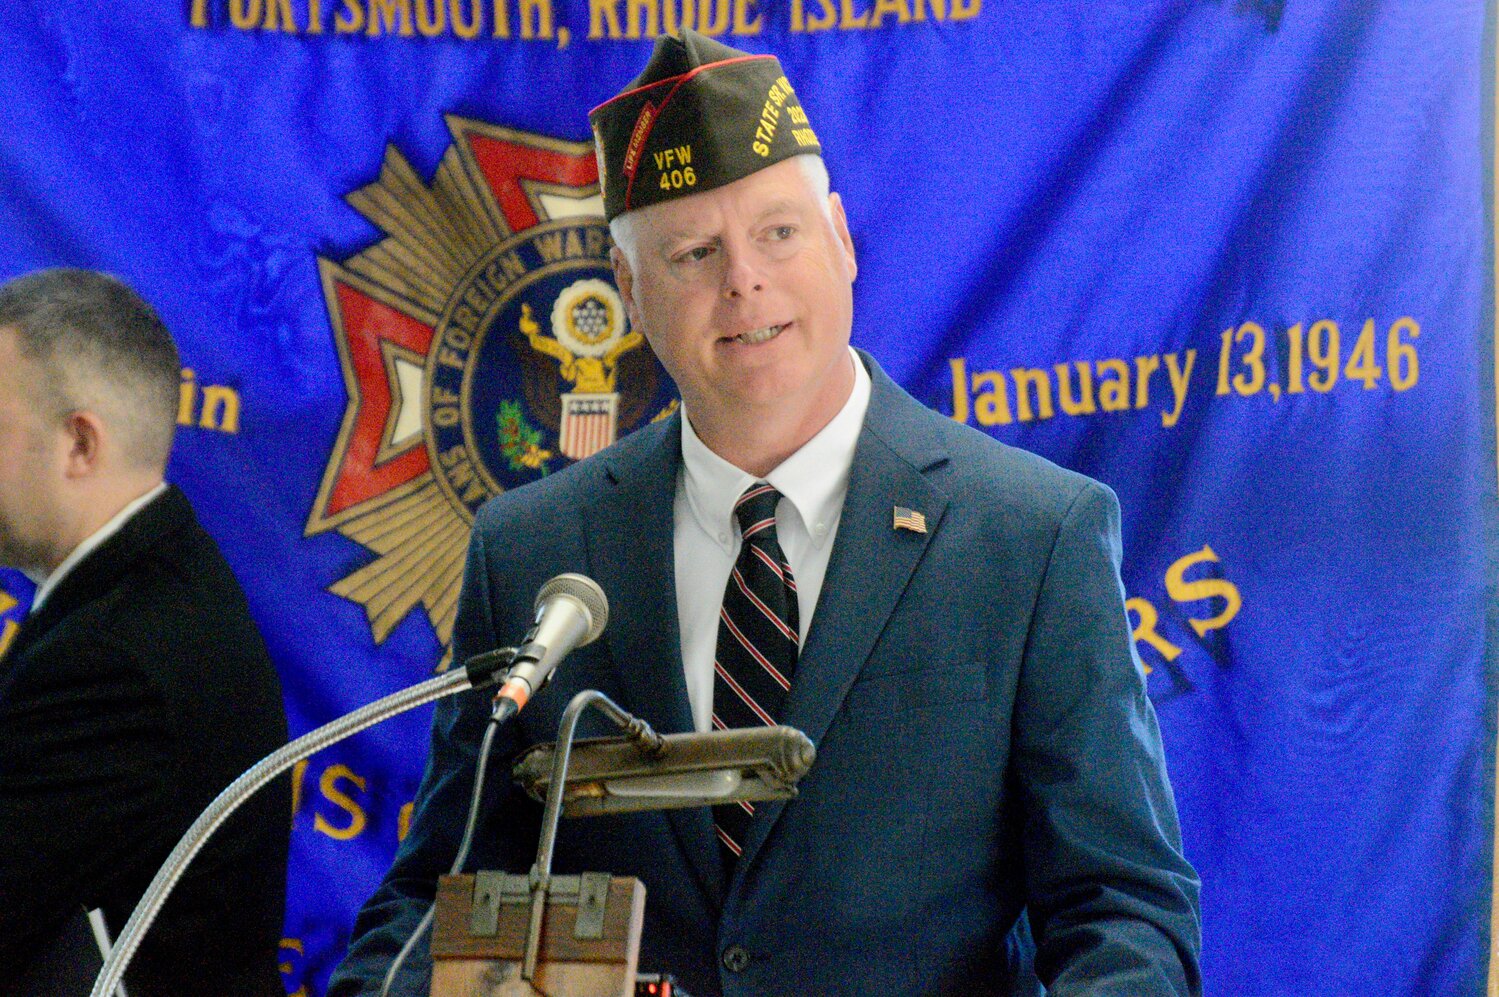 Capt. Mark L. Turner, U.S. Navy (Ret.) was the guest speaker at the Veterans Day ceremony held at the VFW Post 5390 Saturday morning. The event also served as the grand reopening of the building, which has undergone major improvements in the past several weeks.